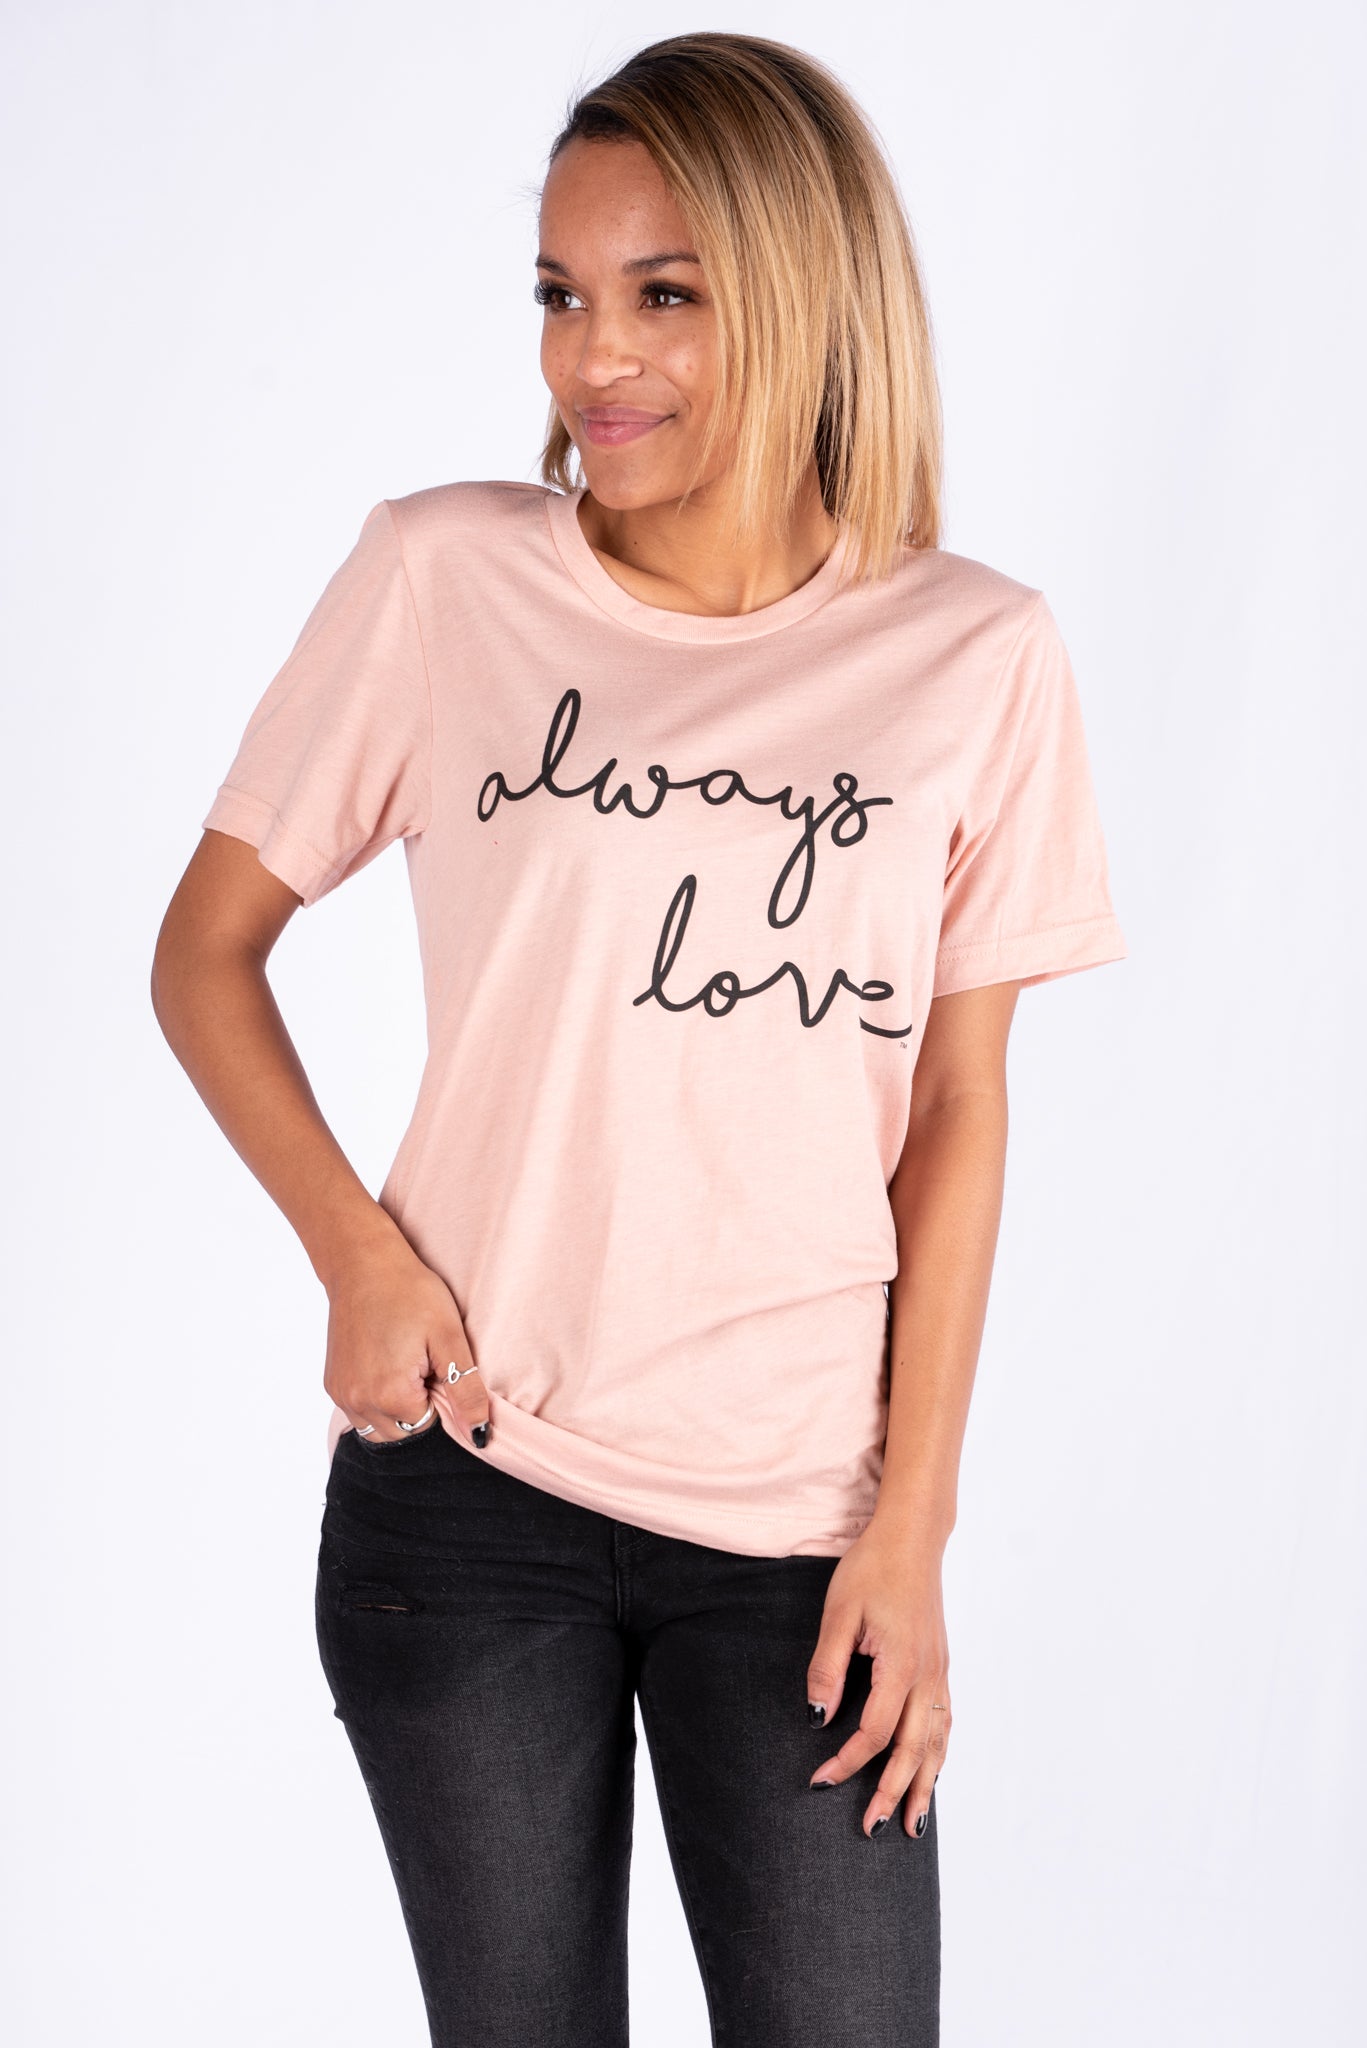 Always love unisex short sleeve t-shirt peach - Cute T-shirts - Funny T-Shirts at Lush Fashion Lounge Boutique in Oklahoma City